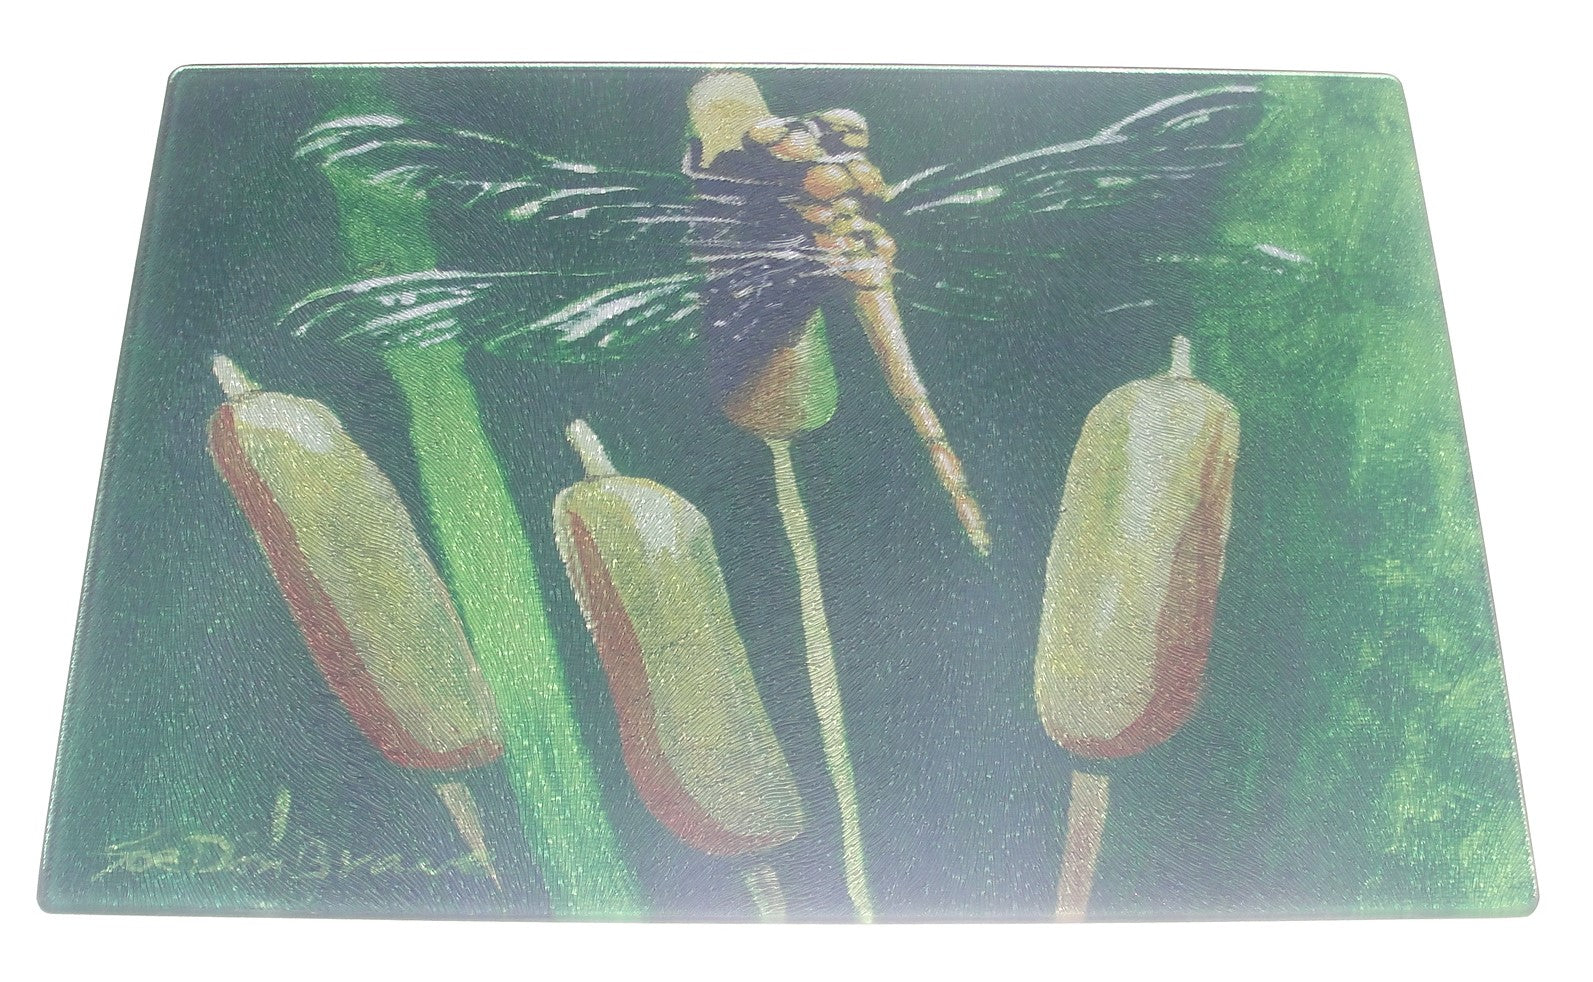 Cutting Board, Glass, Dragonfly on Cattails